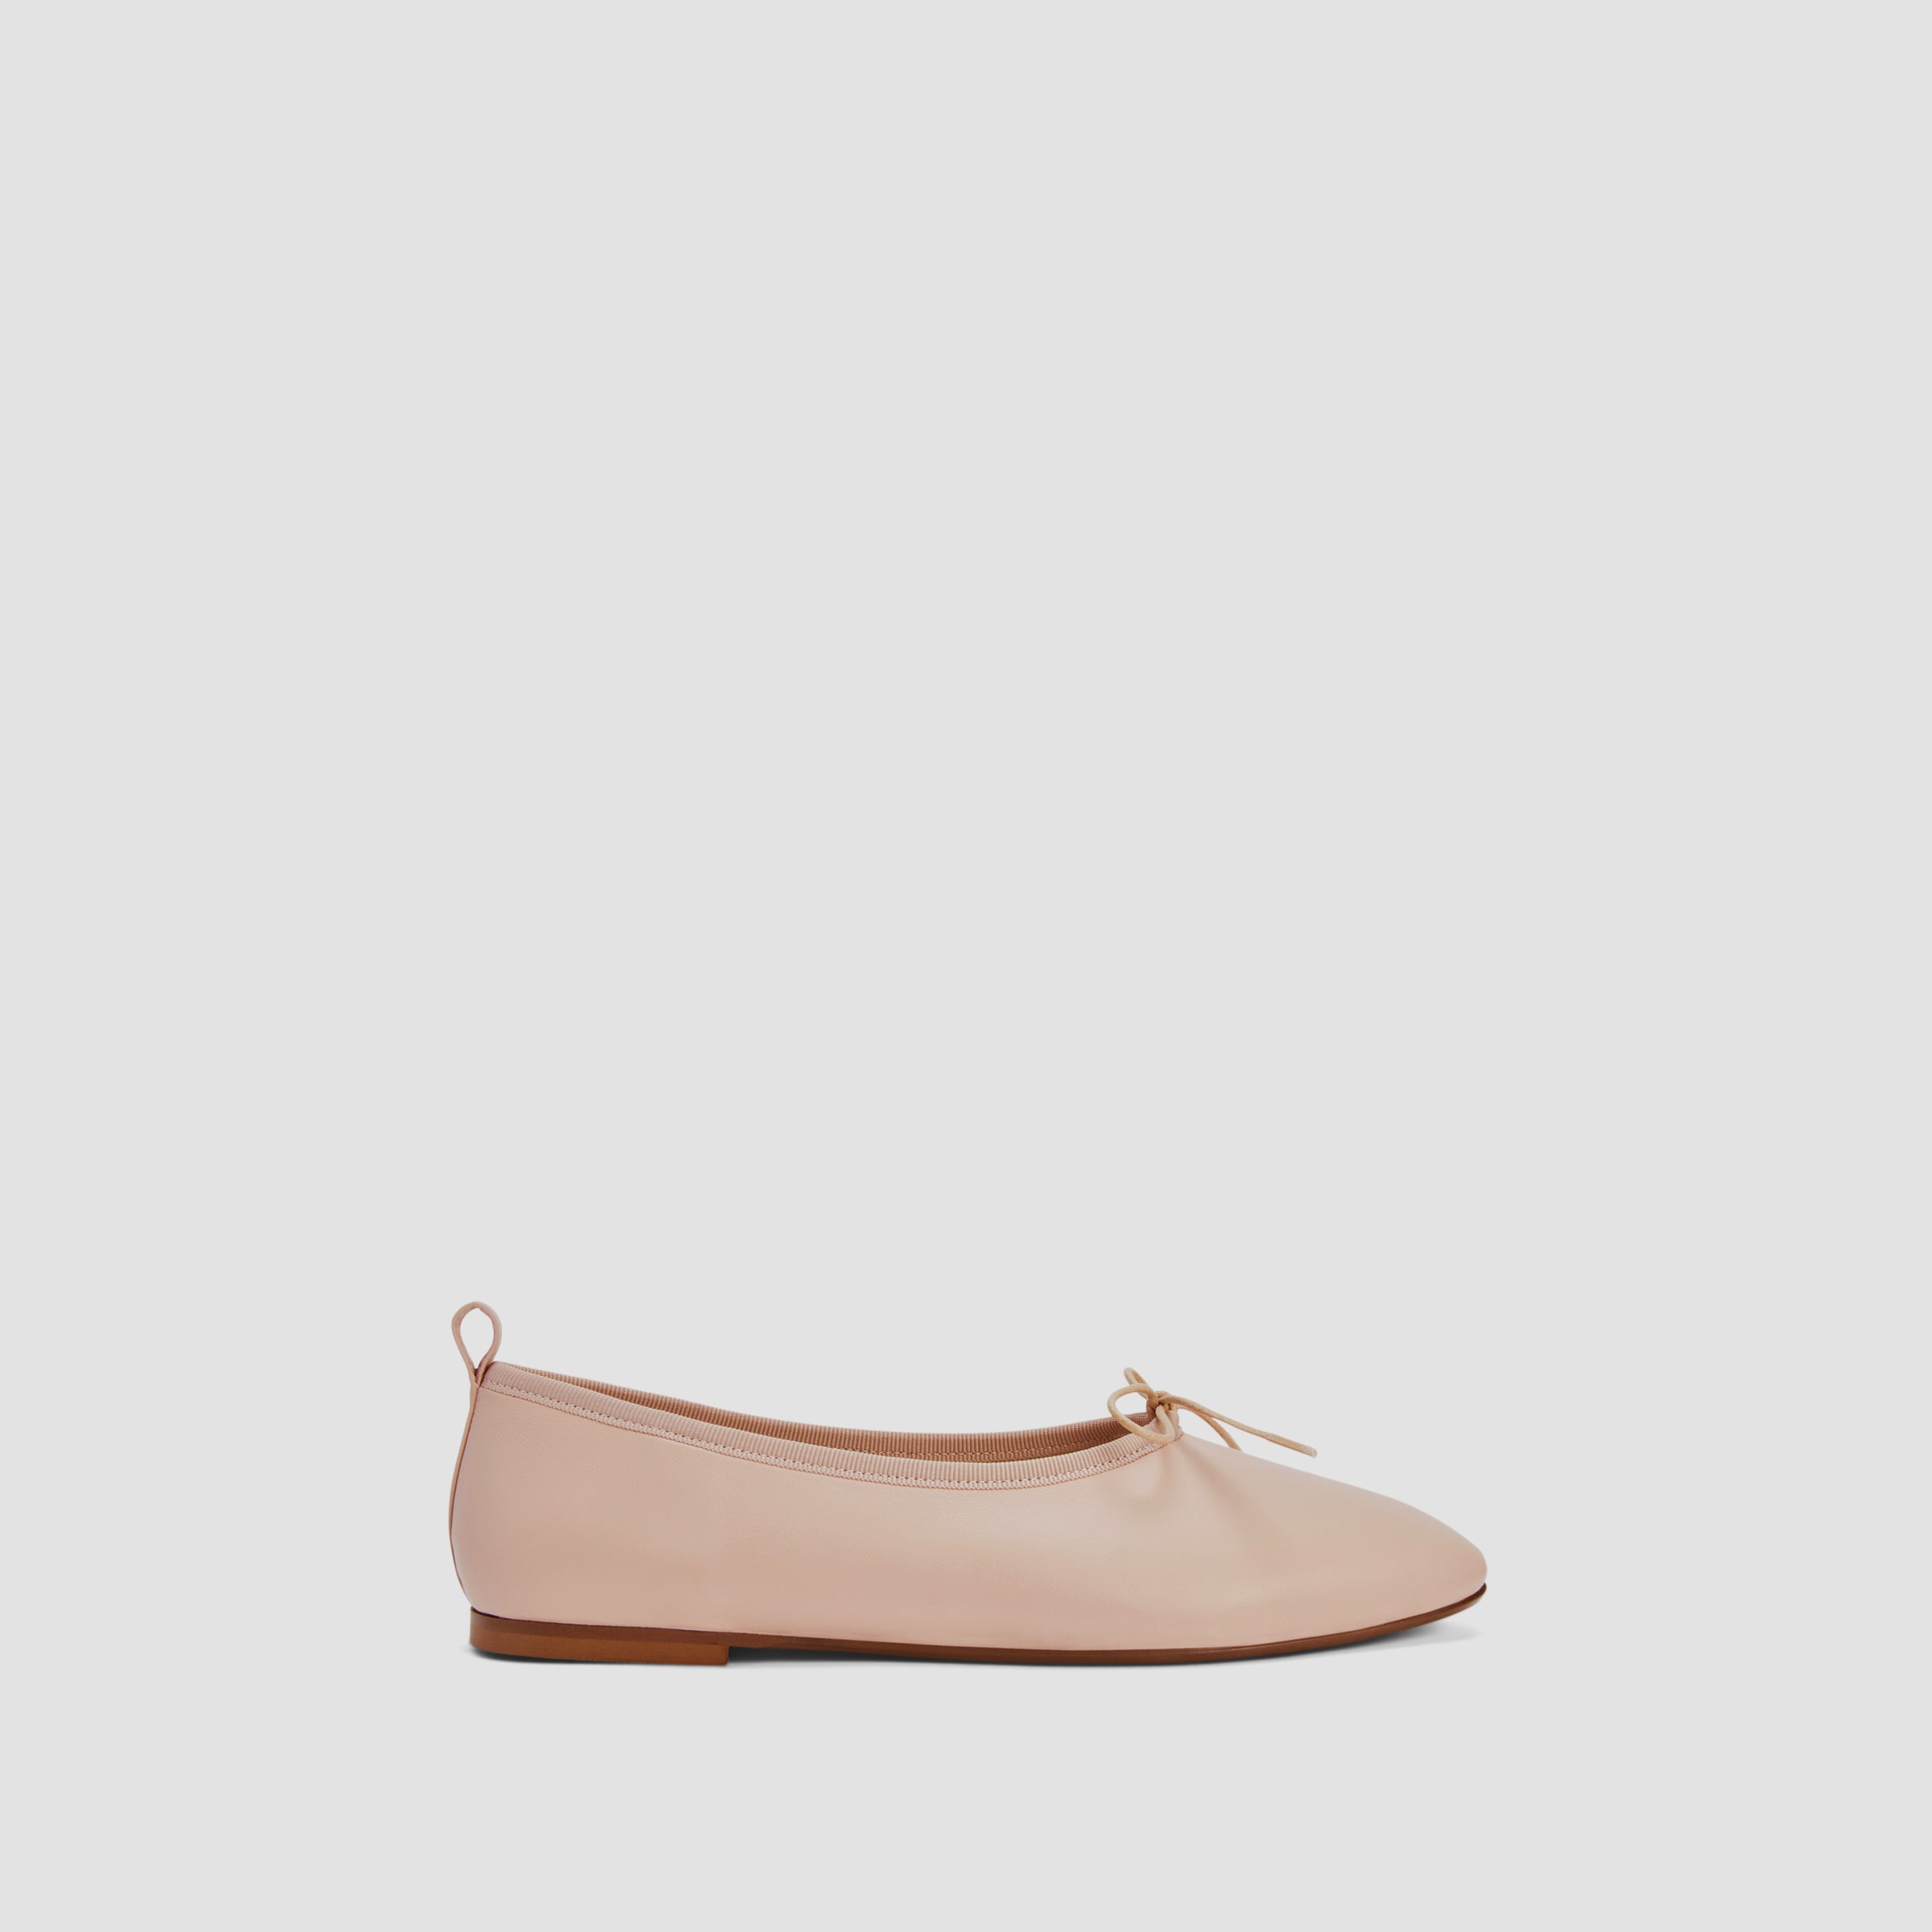 The Ballet Flat Pale Pink – Everlane